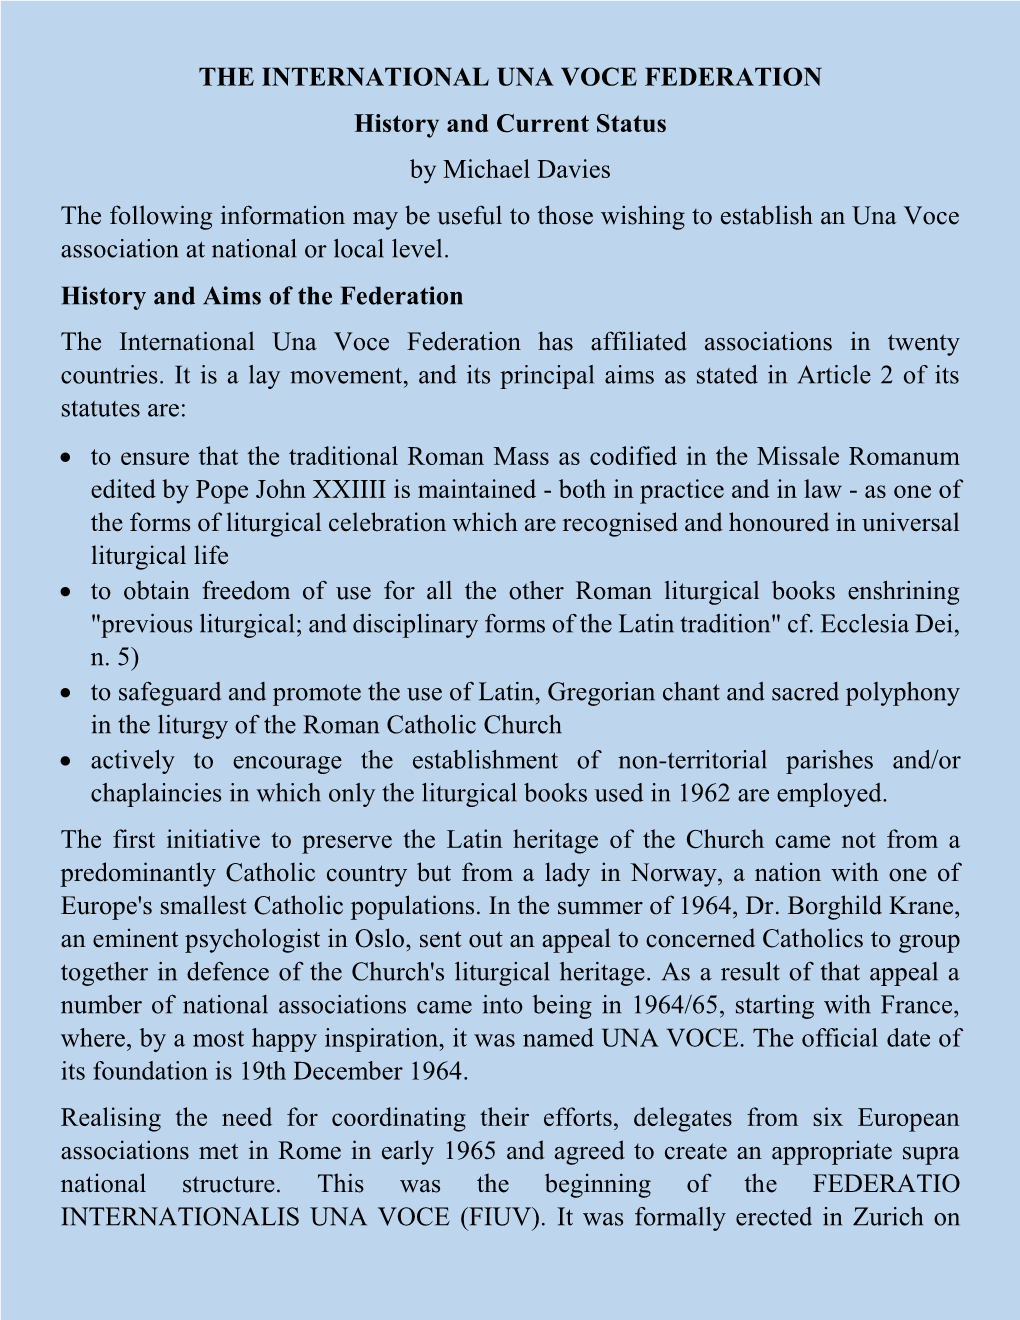 The International Una Voce Federation History and Current Status